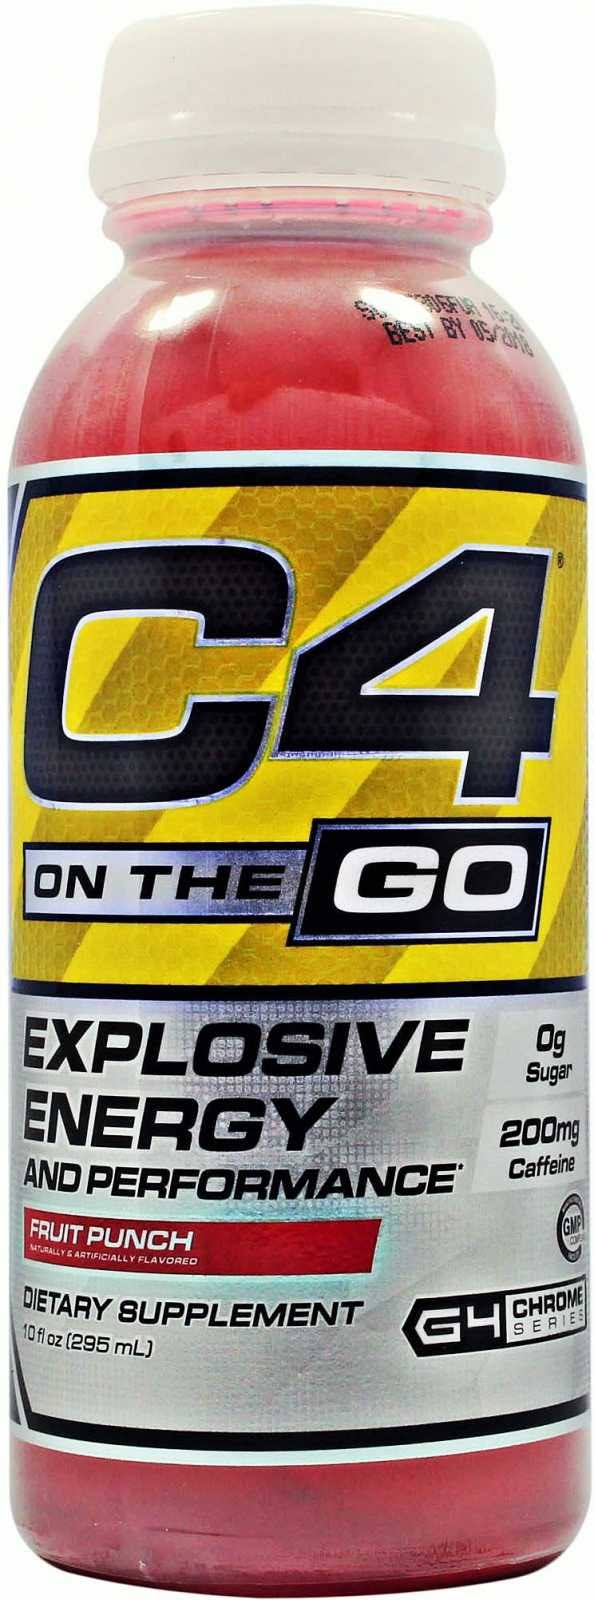 C4 On The Go Pre-workout Supplement - Fruit Punch, 10oz